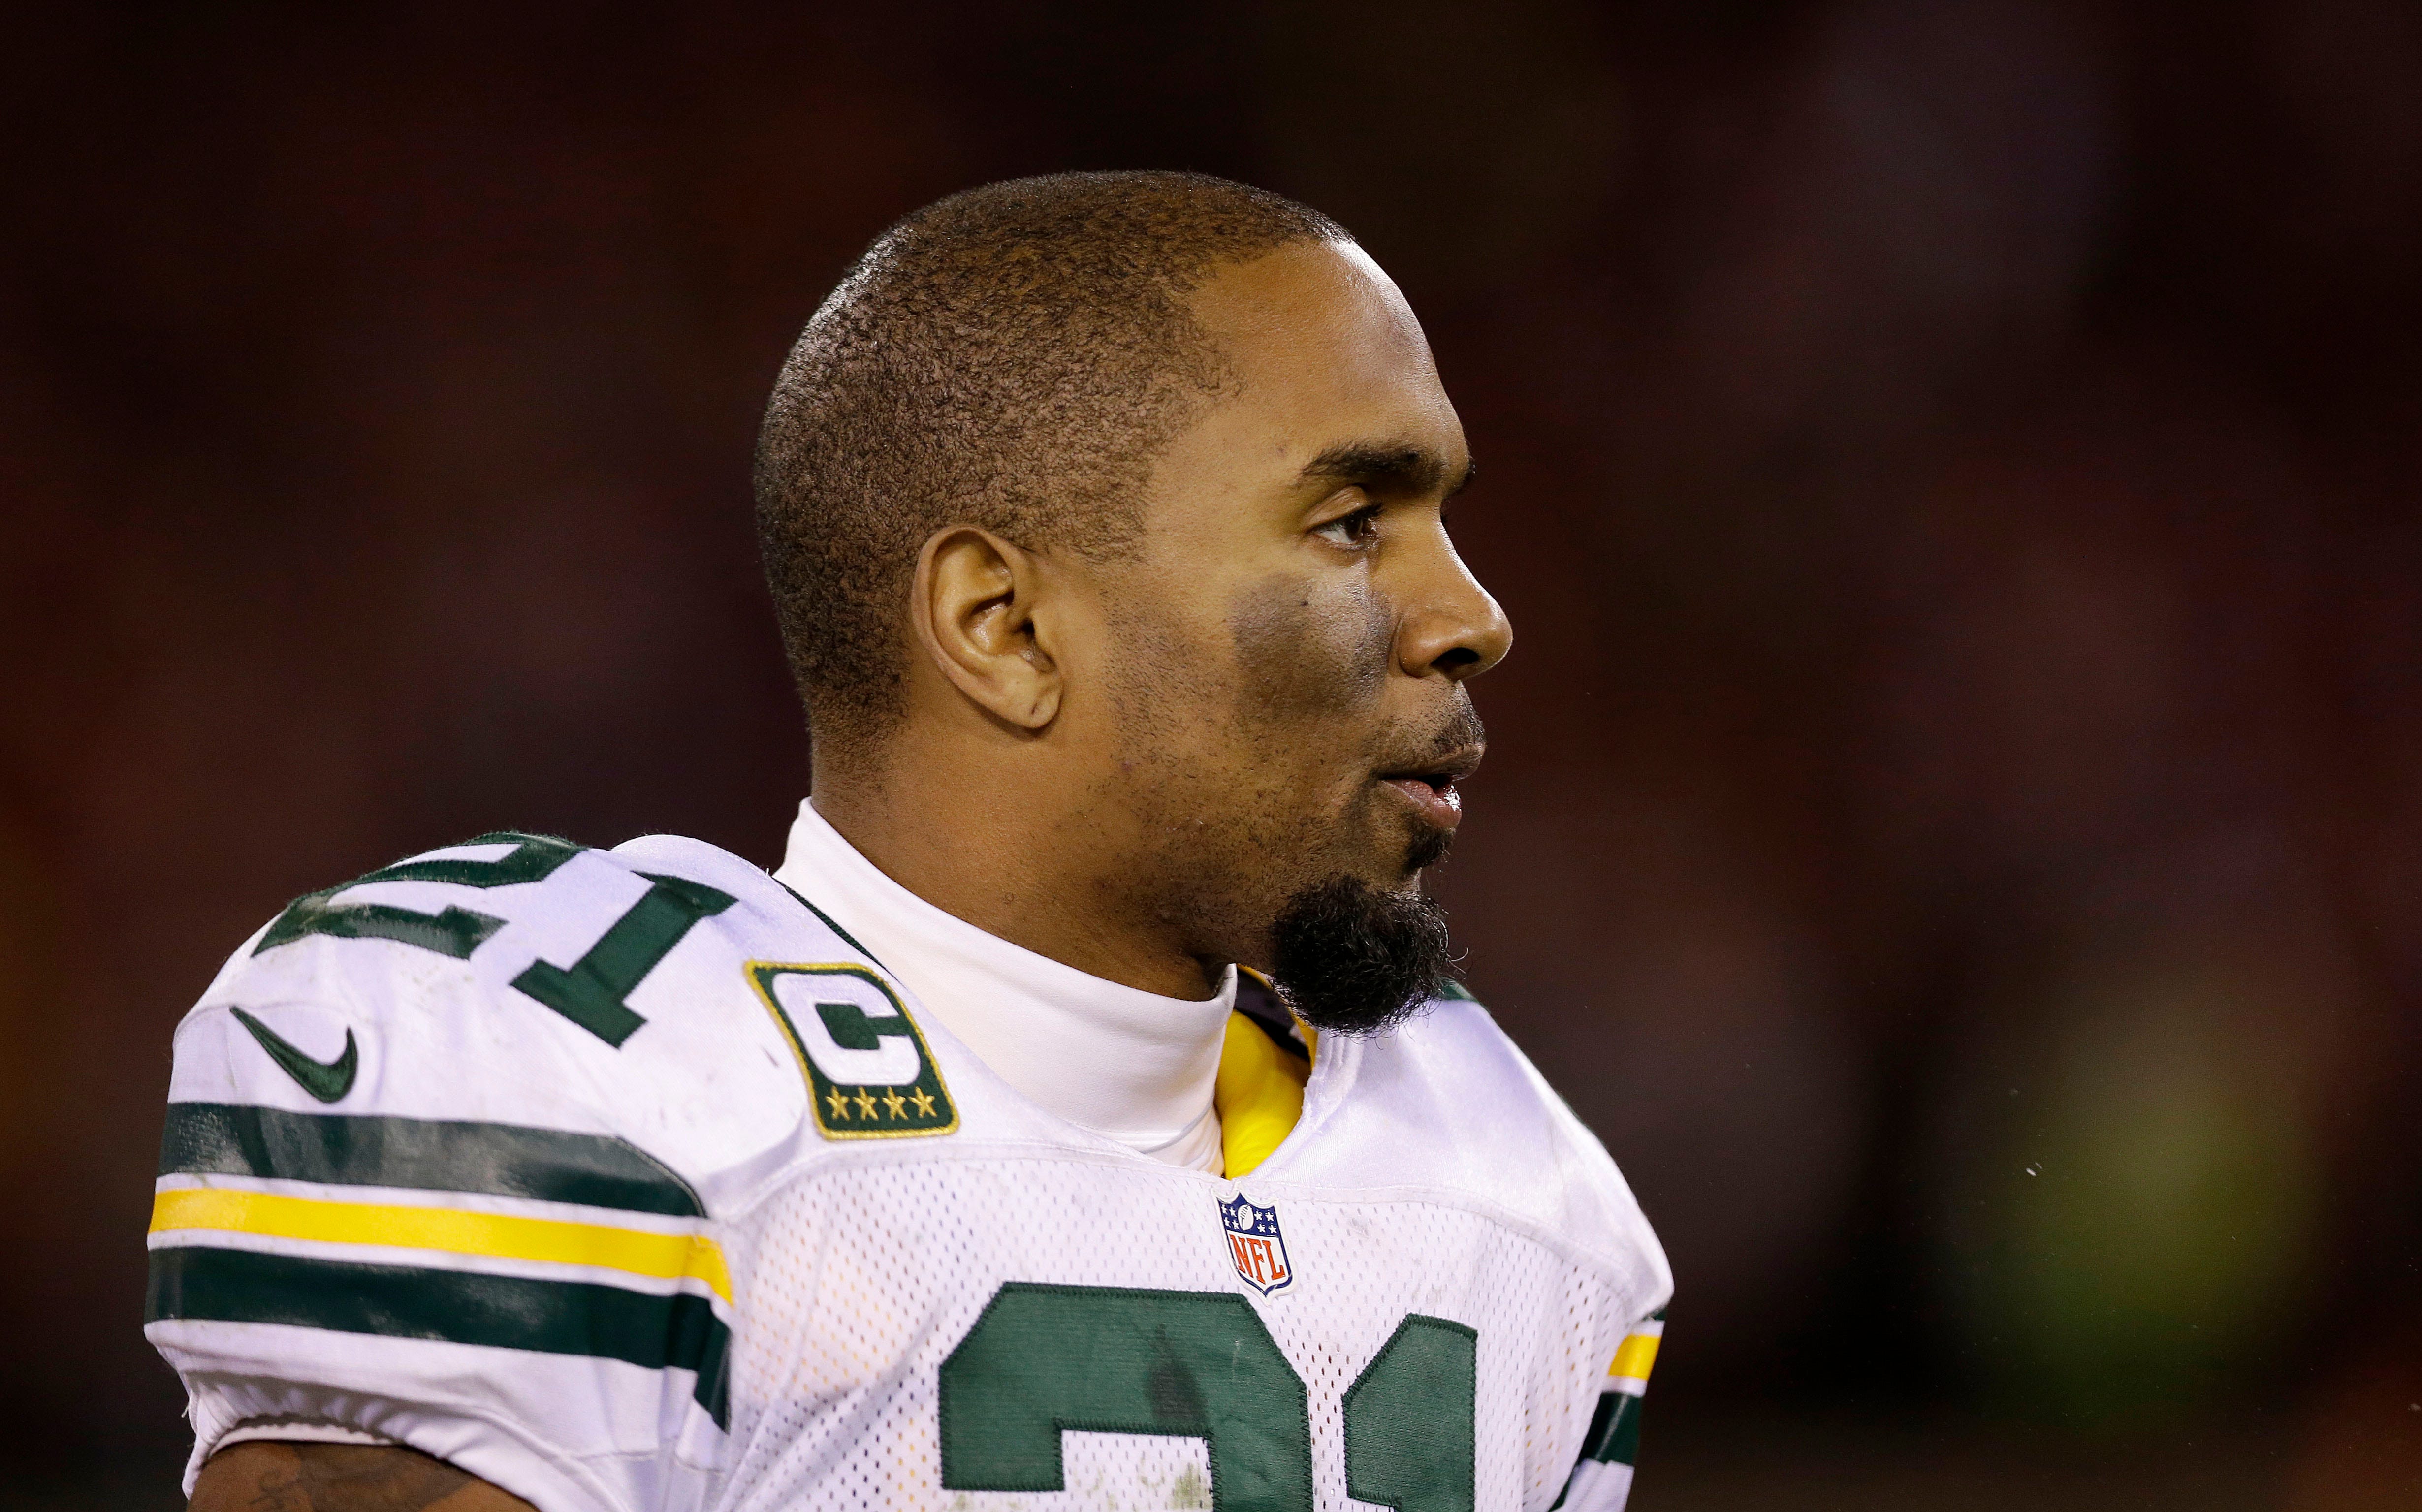 charles woodson hall of fame as a packer or raider